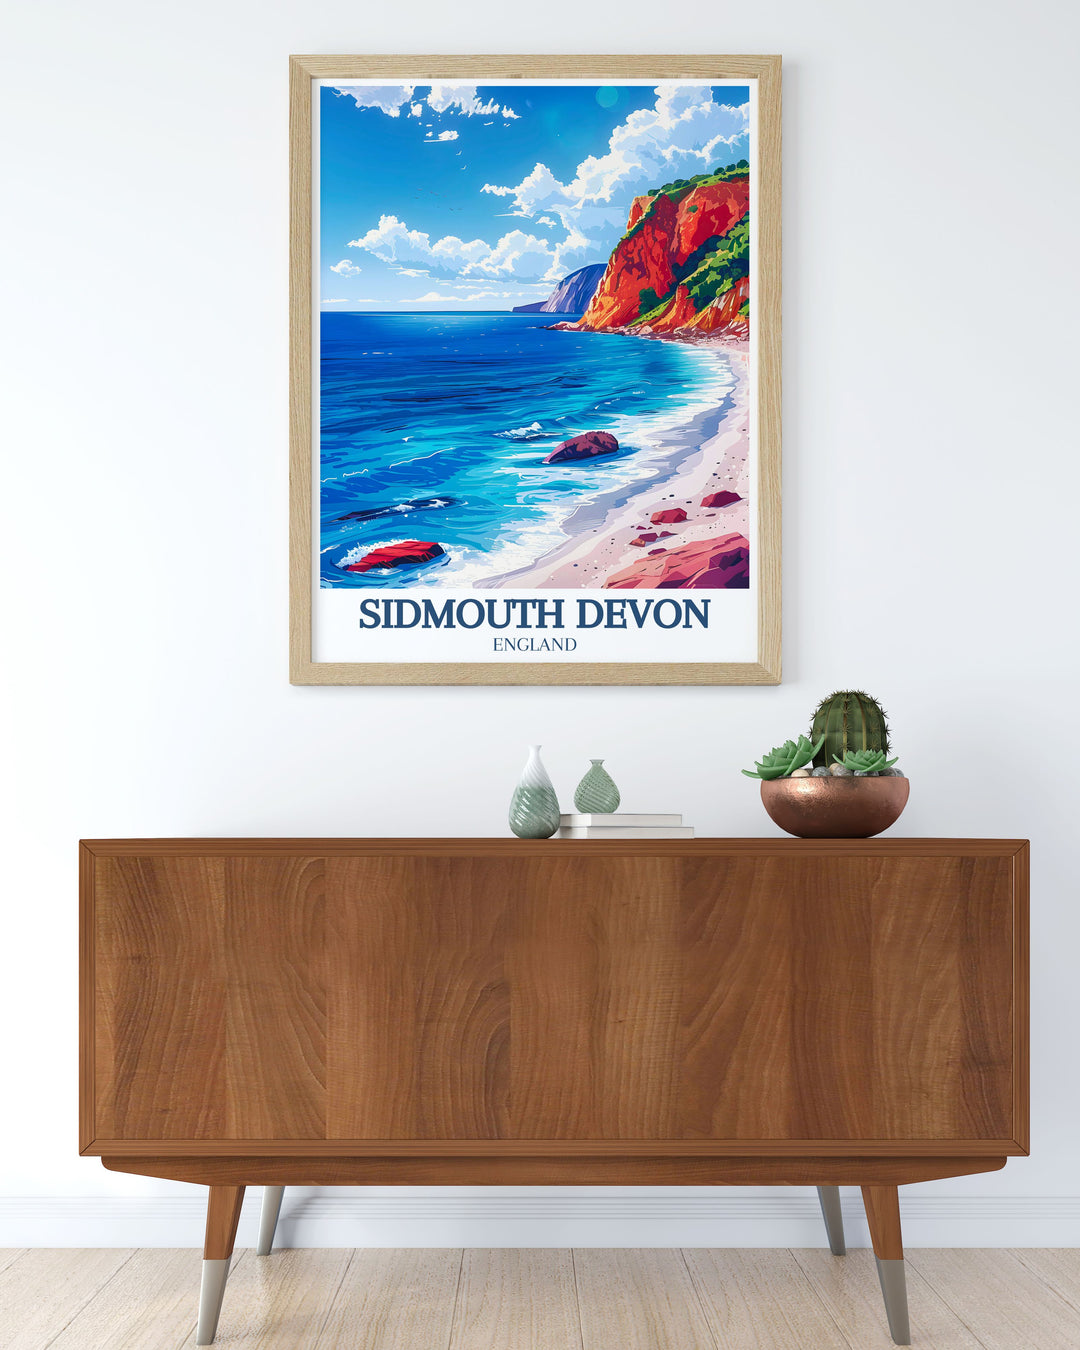 The Jurassic Cliffs and Sidmouth Beach are beautifully depicted in this travel poster, celebrating the iconic landmarks and natural beauty of Devon, ideal for travel lovers and coastal enthusiasts.